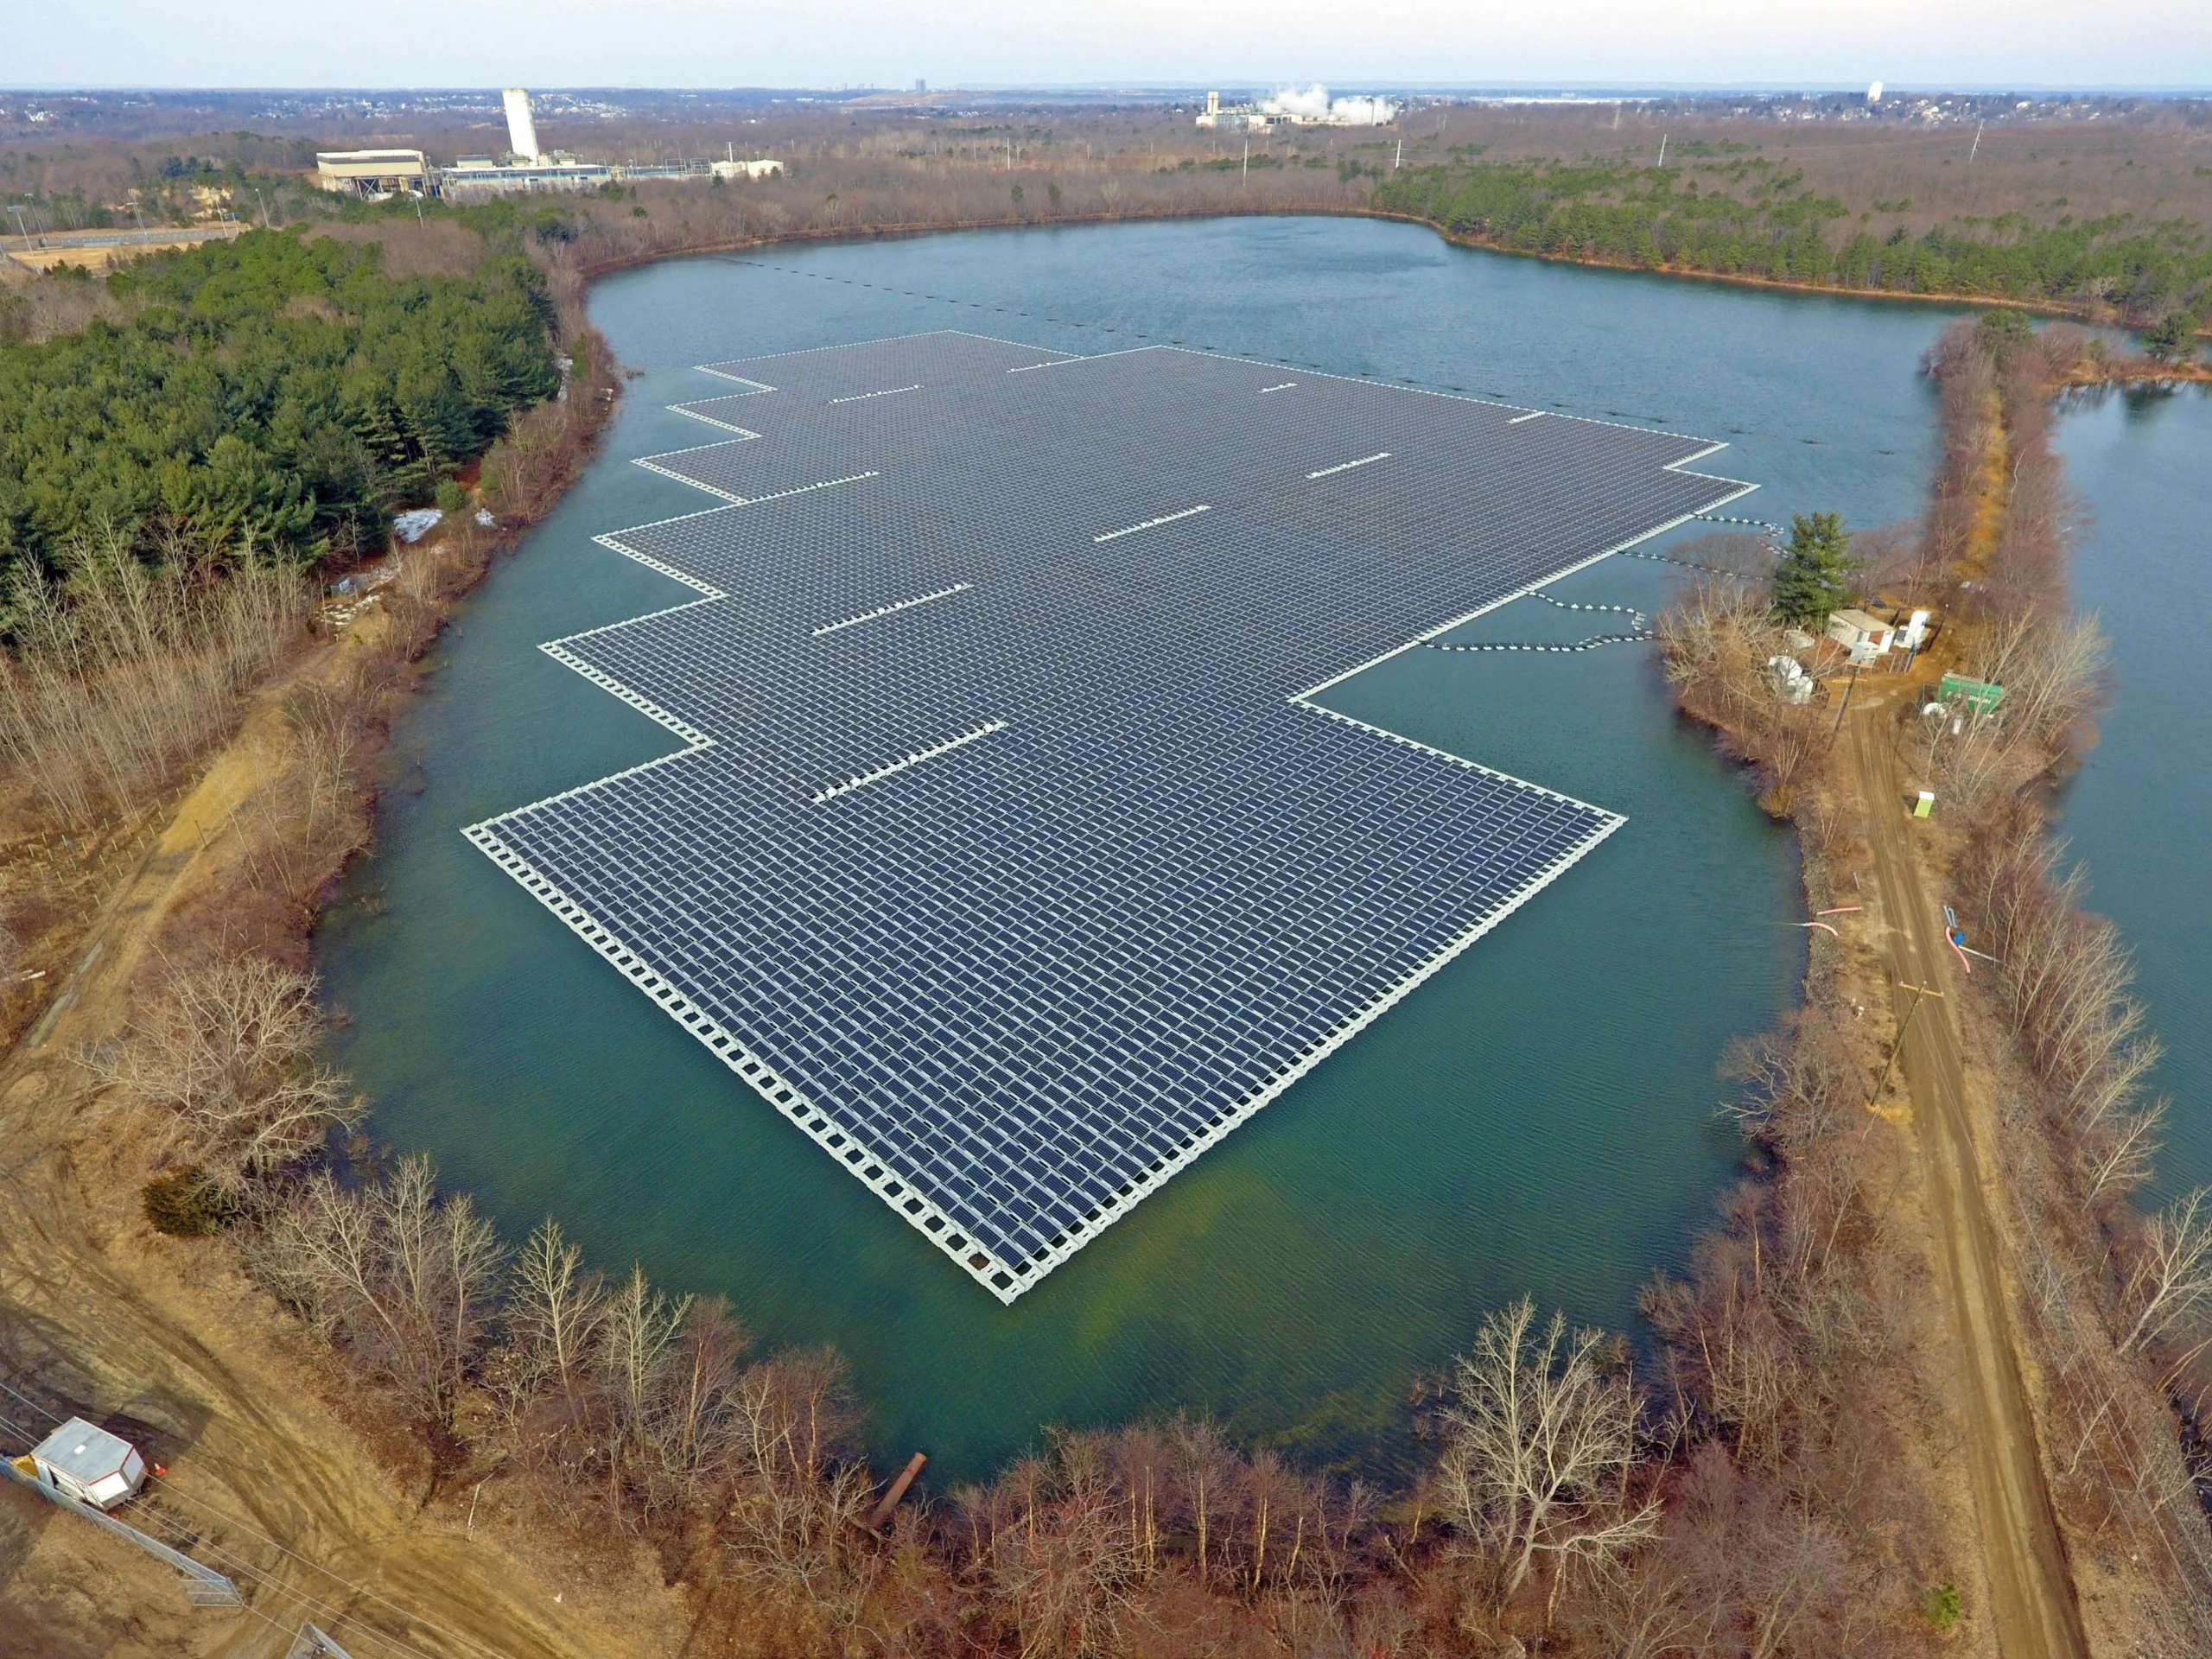 floating solar panels - What is the future of floating solar